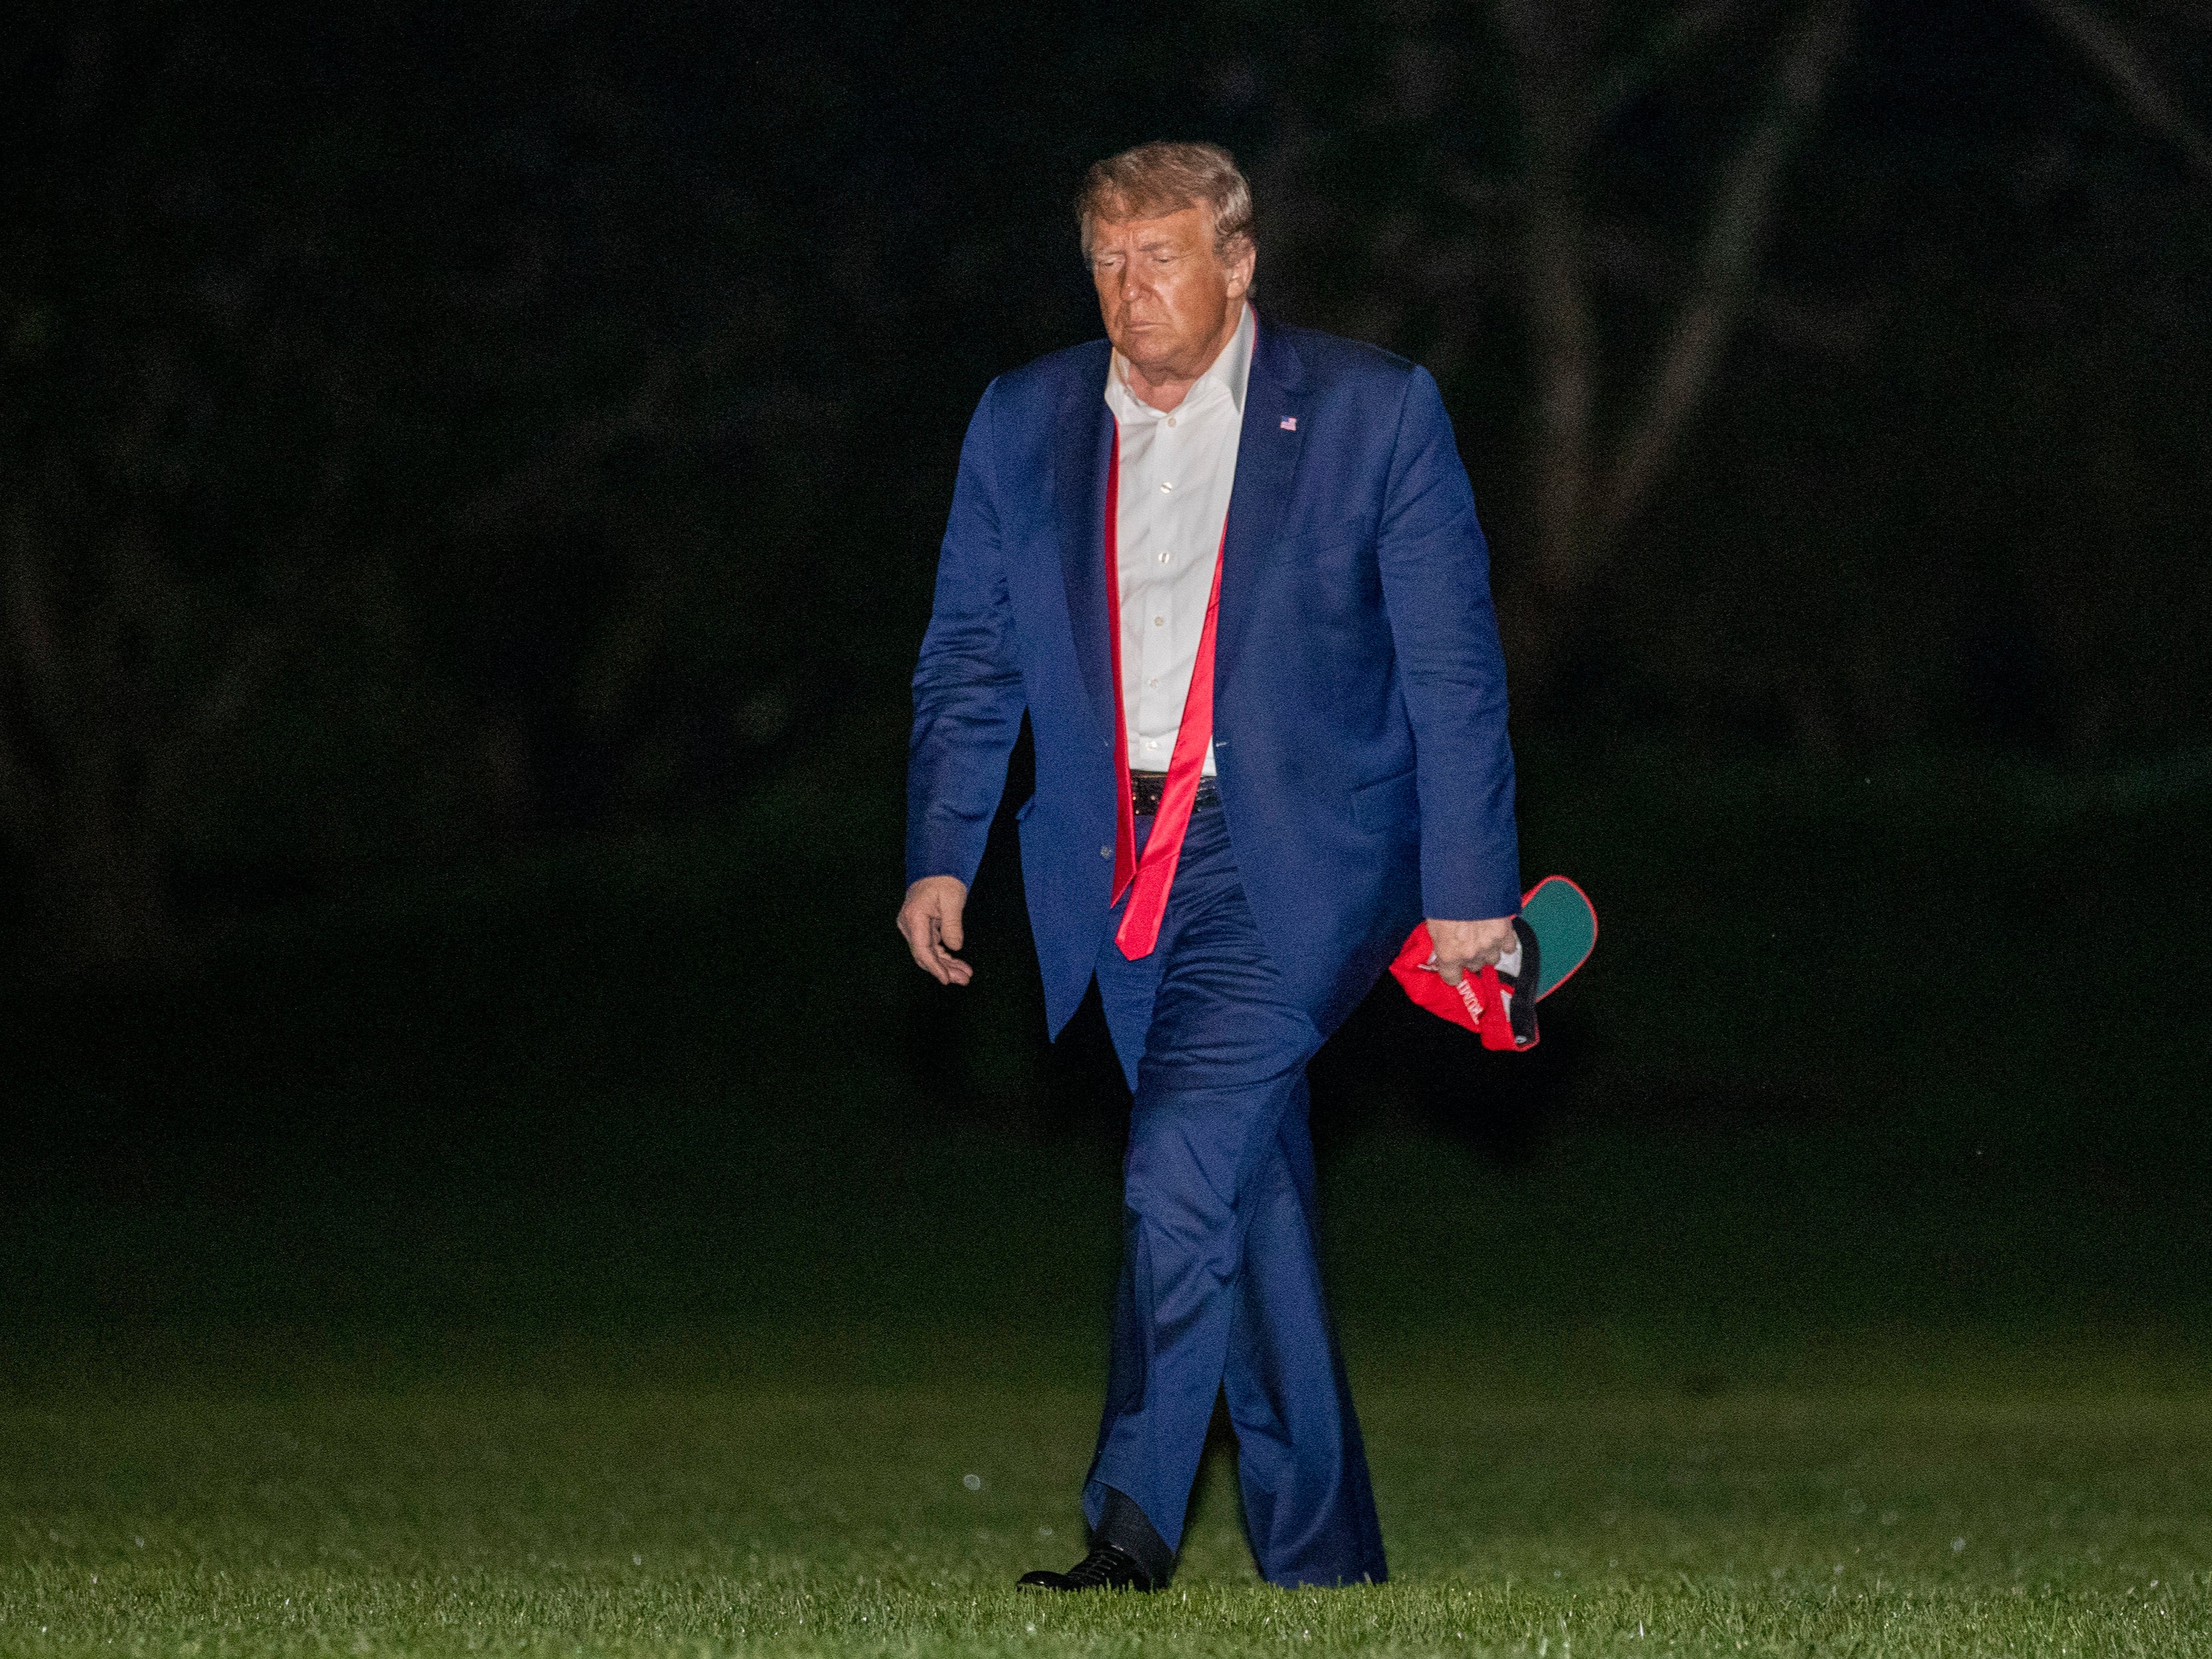 Donald Trump, returning from a campaign rally in Tulsa, Oklahoma, 21 June, 2020